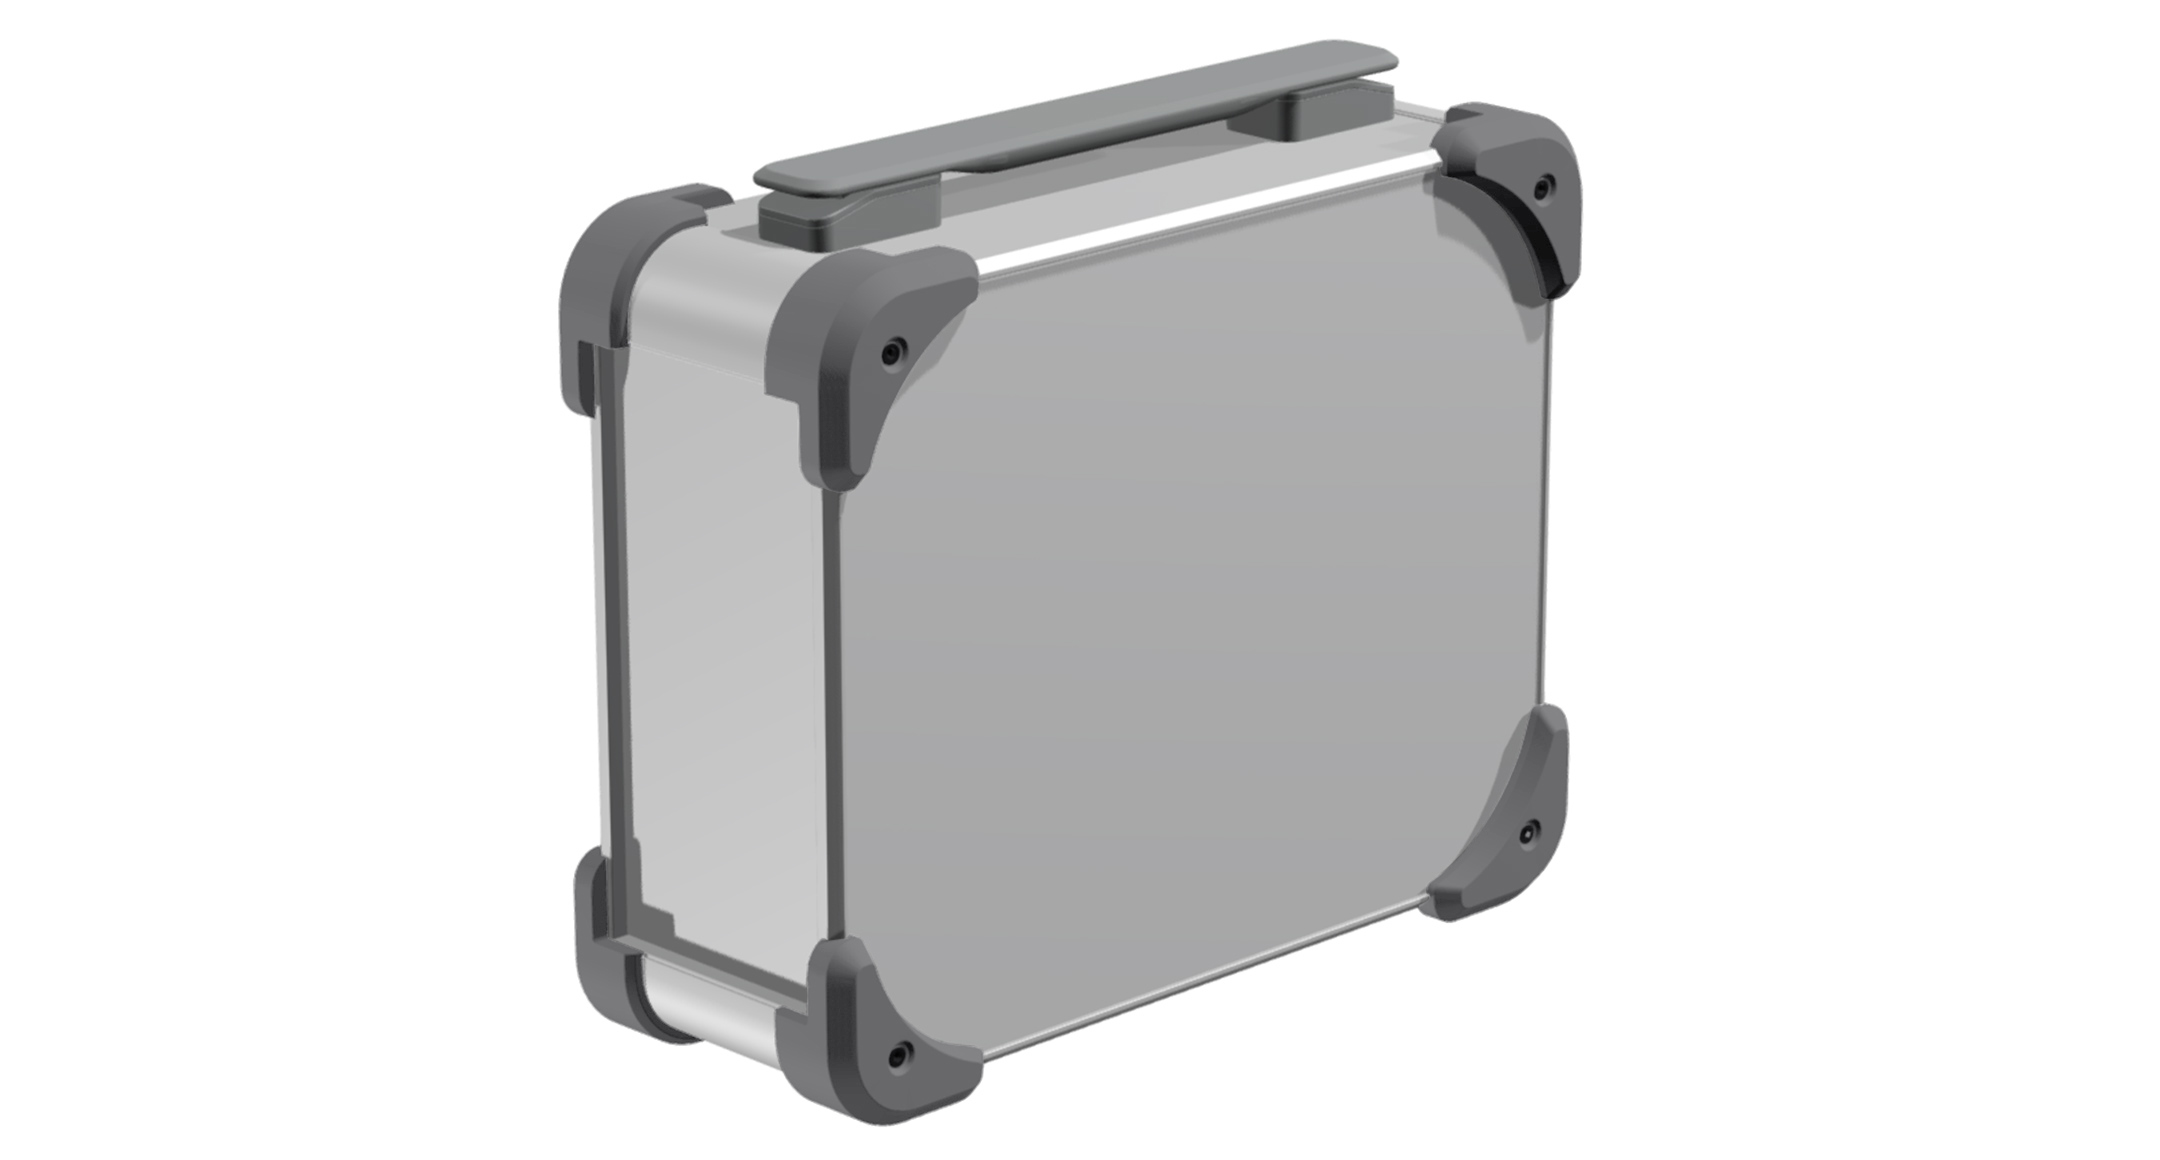 PORTABLE ALUMINIUM INSTRUMENT CASE with HANDLE - AUGH series:Silver / Gray / Gray